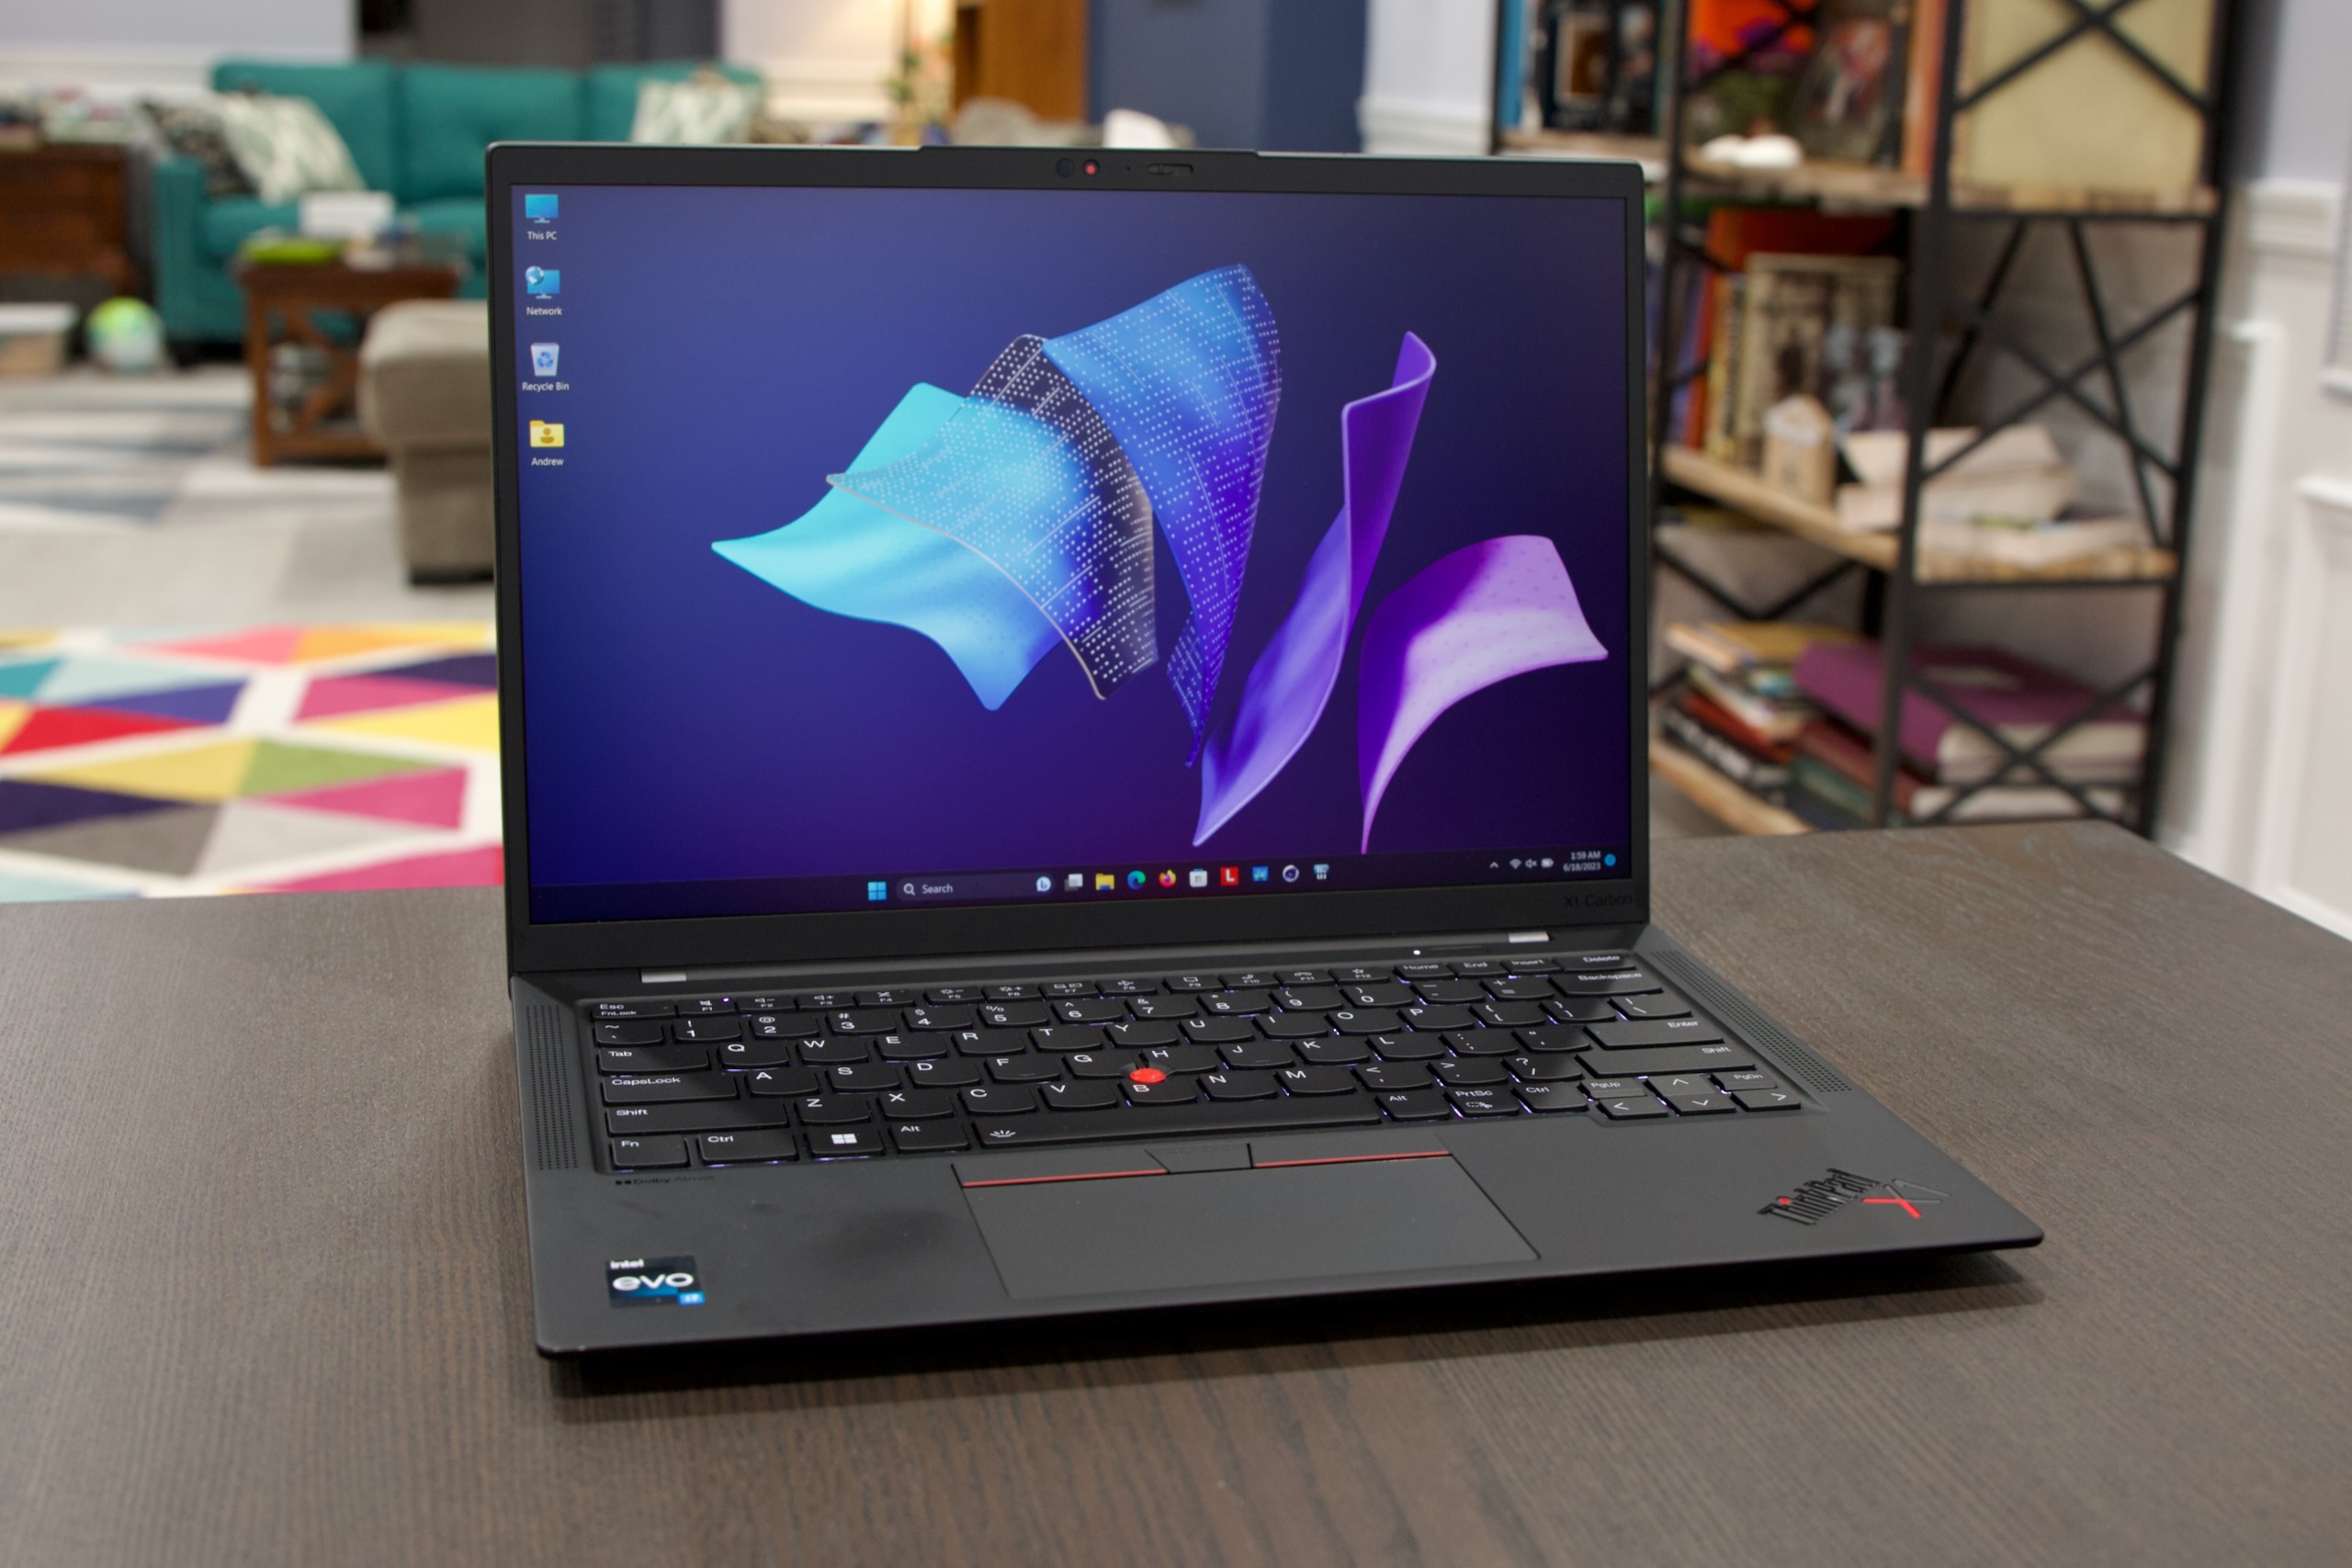 Lenovo ThinkPad X1 Carbon Gen 11 review: Two steps forward, one step back